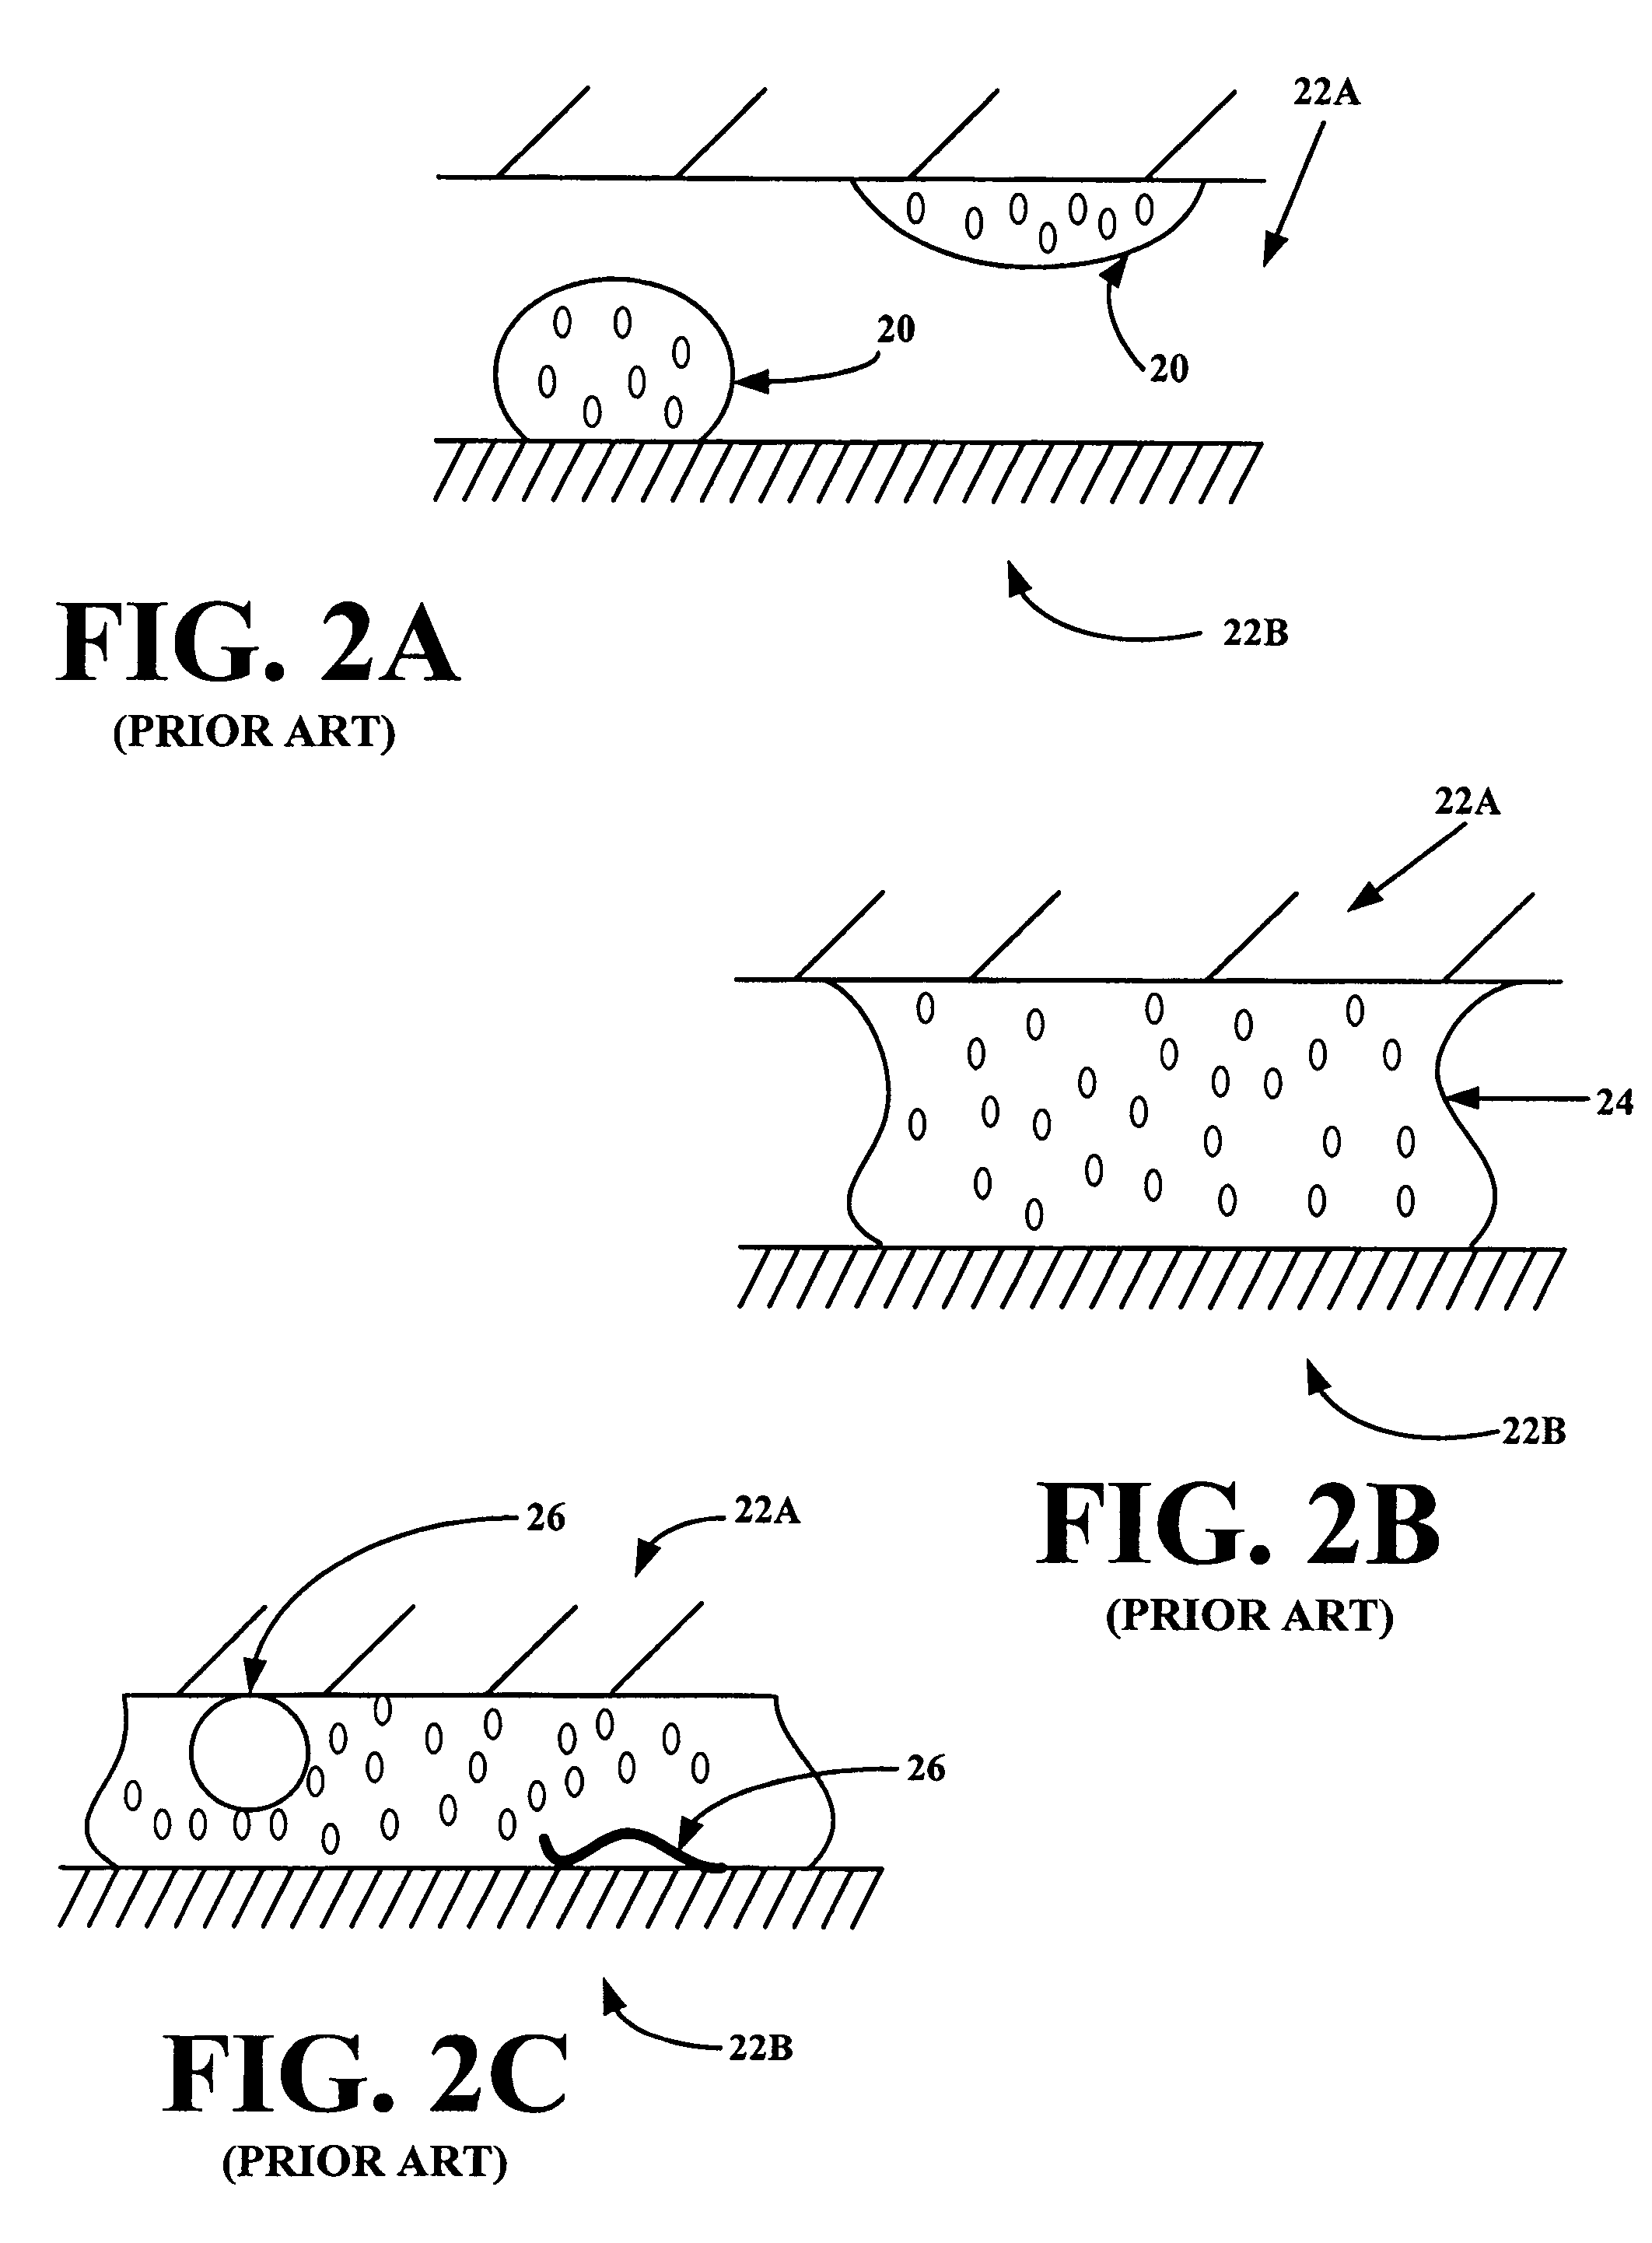 Method and apparatus for treating a biological sample with a liquid reagent